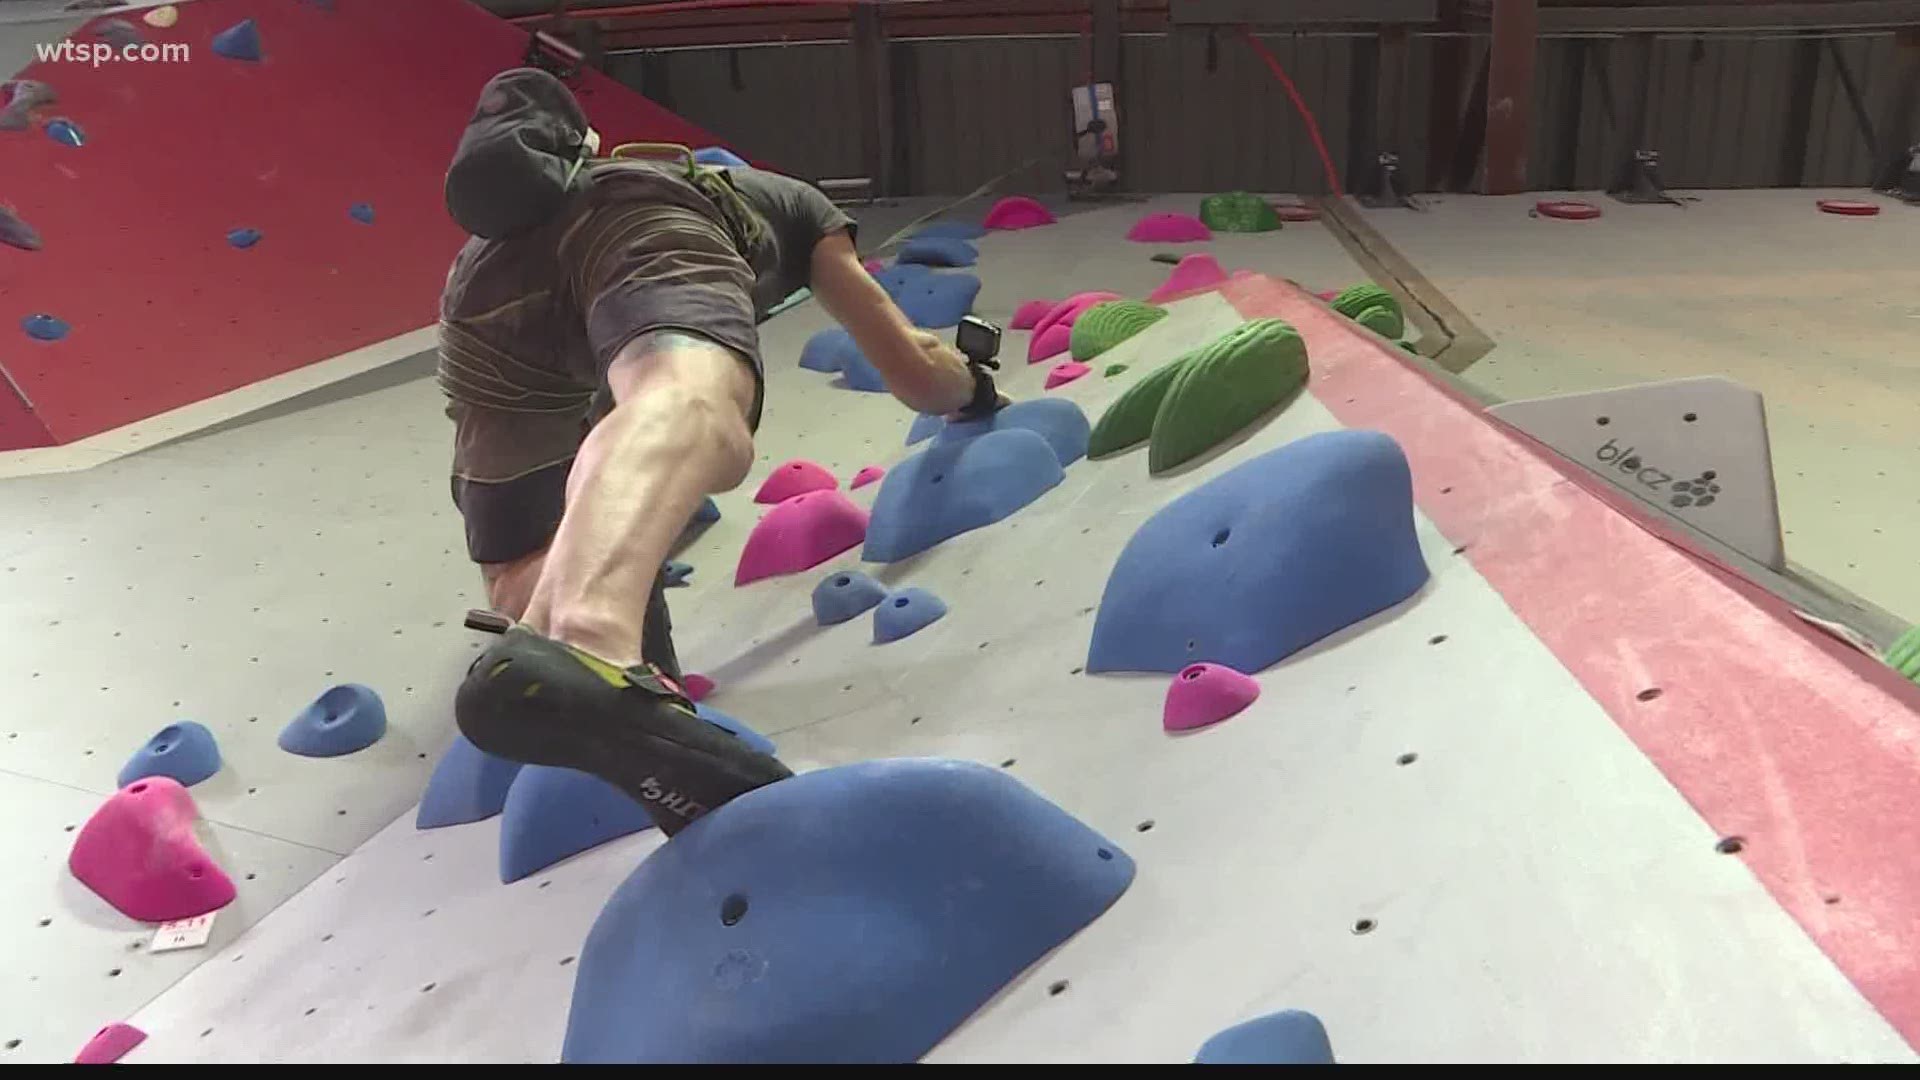 10 Tampa Bay photojournalist Albert Gamboa takes you inside Vertical Ventures, where they want to help you get moving.